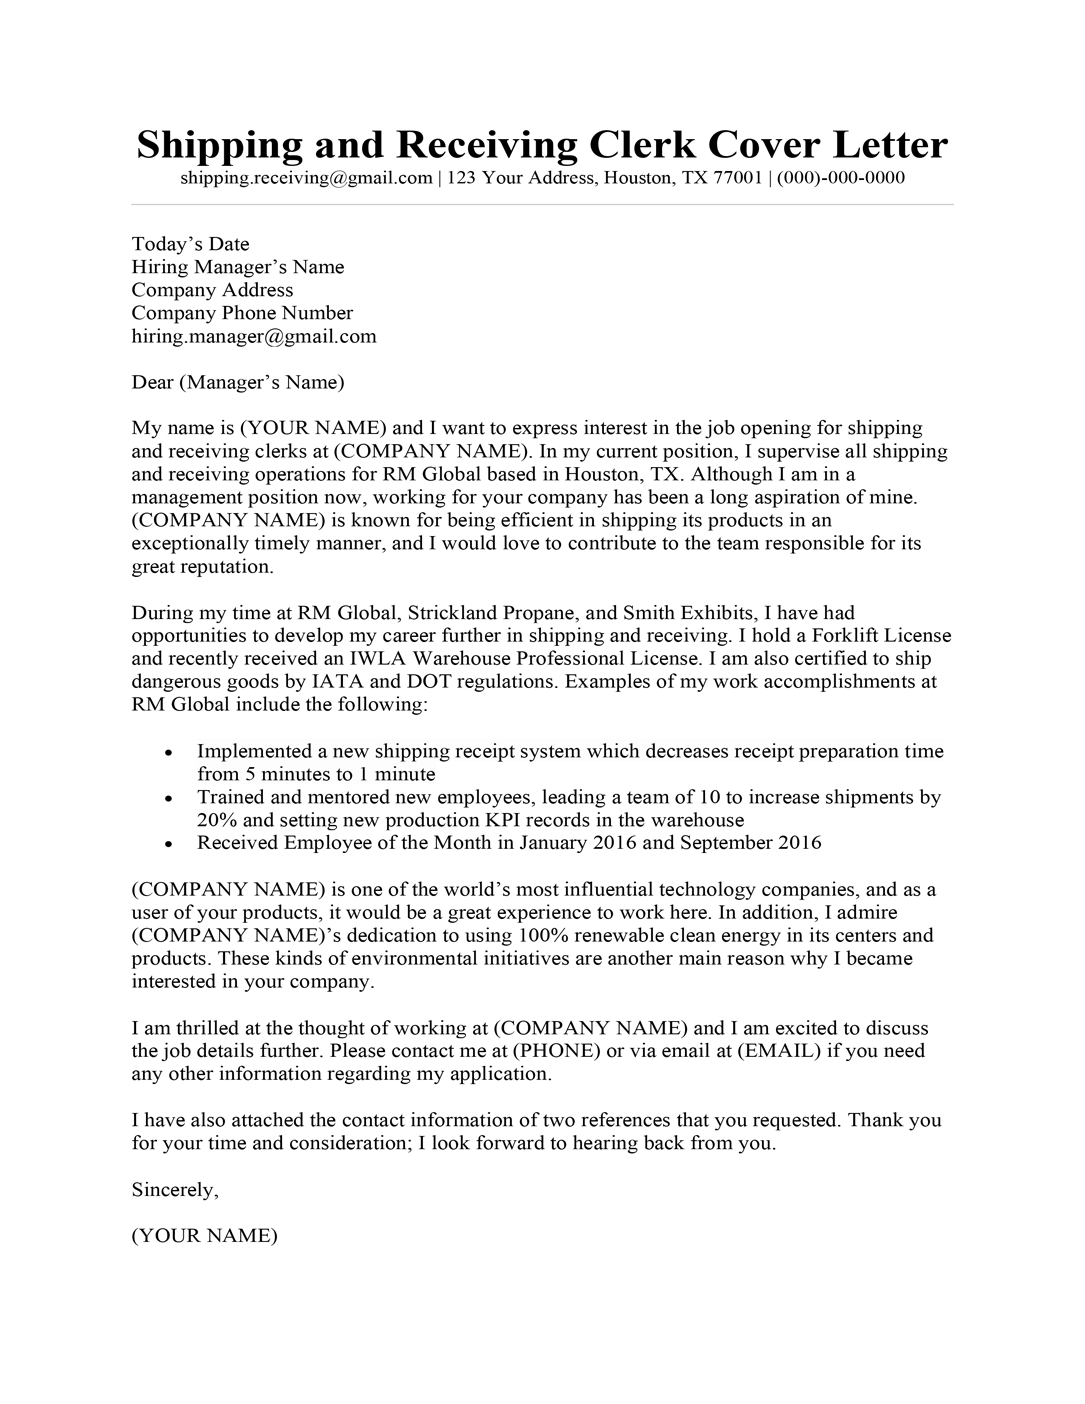 sample letter of consideration for school admission